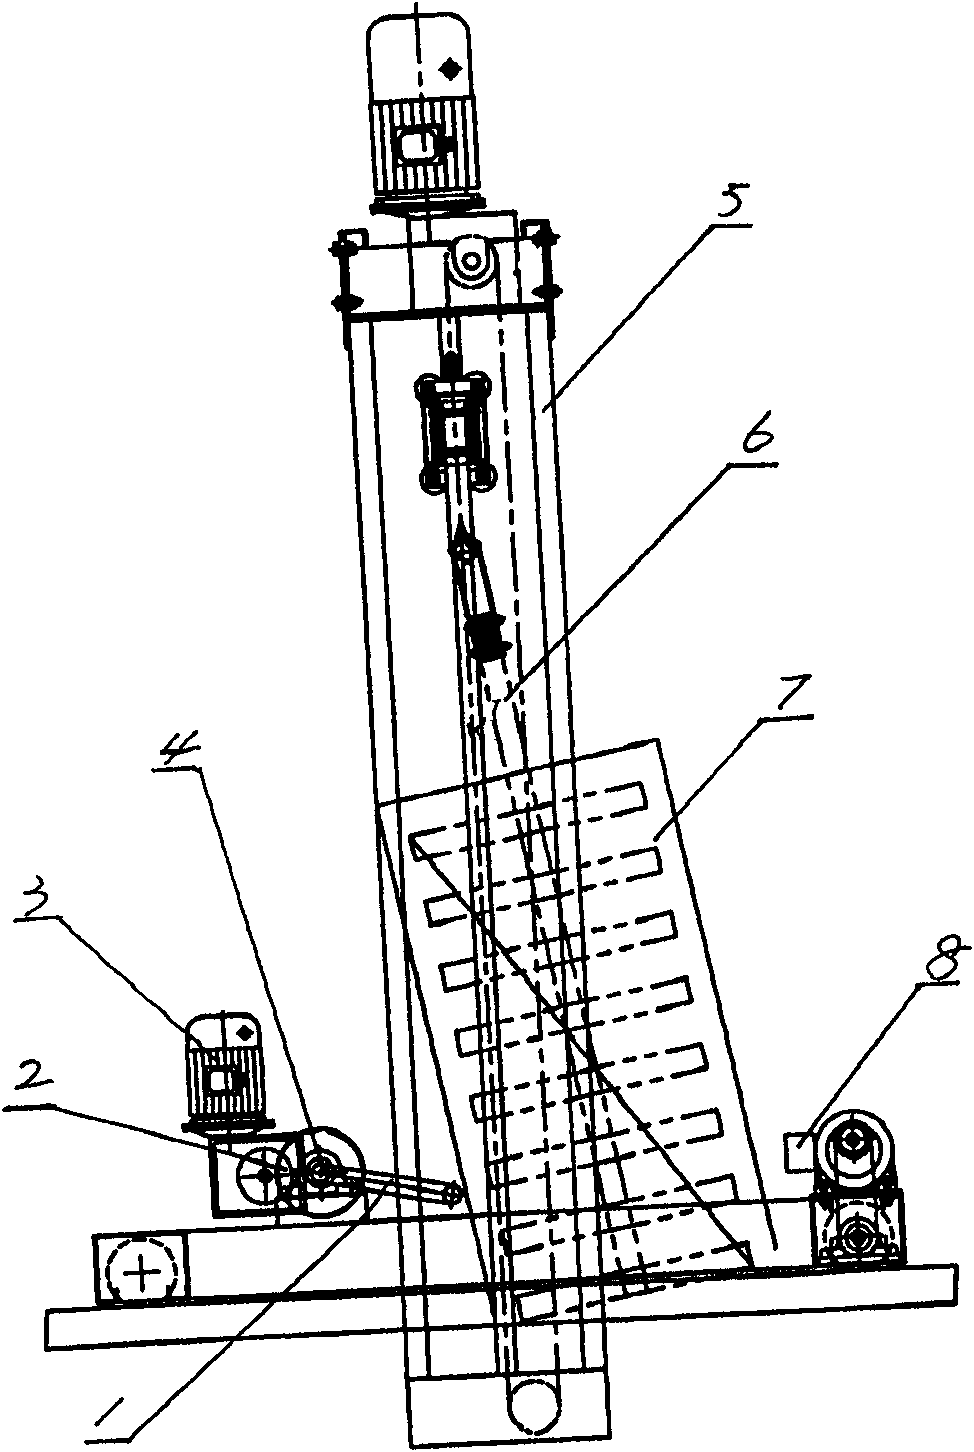 Water pouring device for electroplating travelling crane